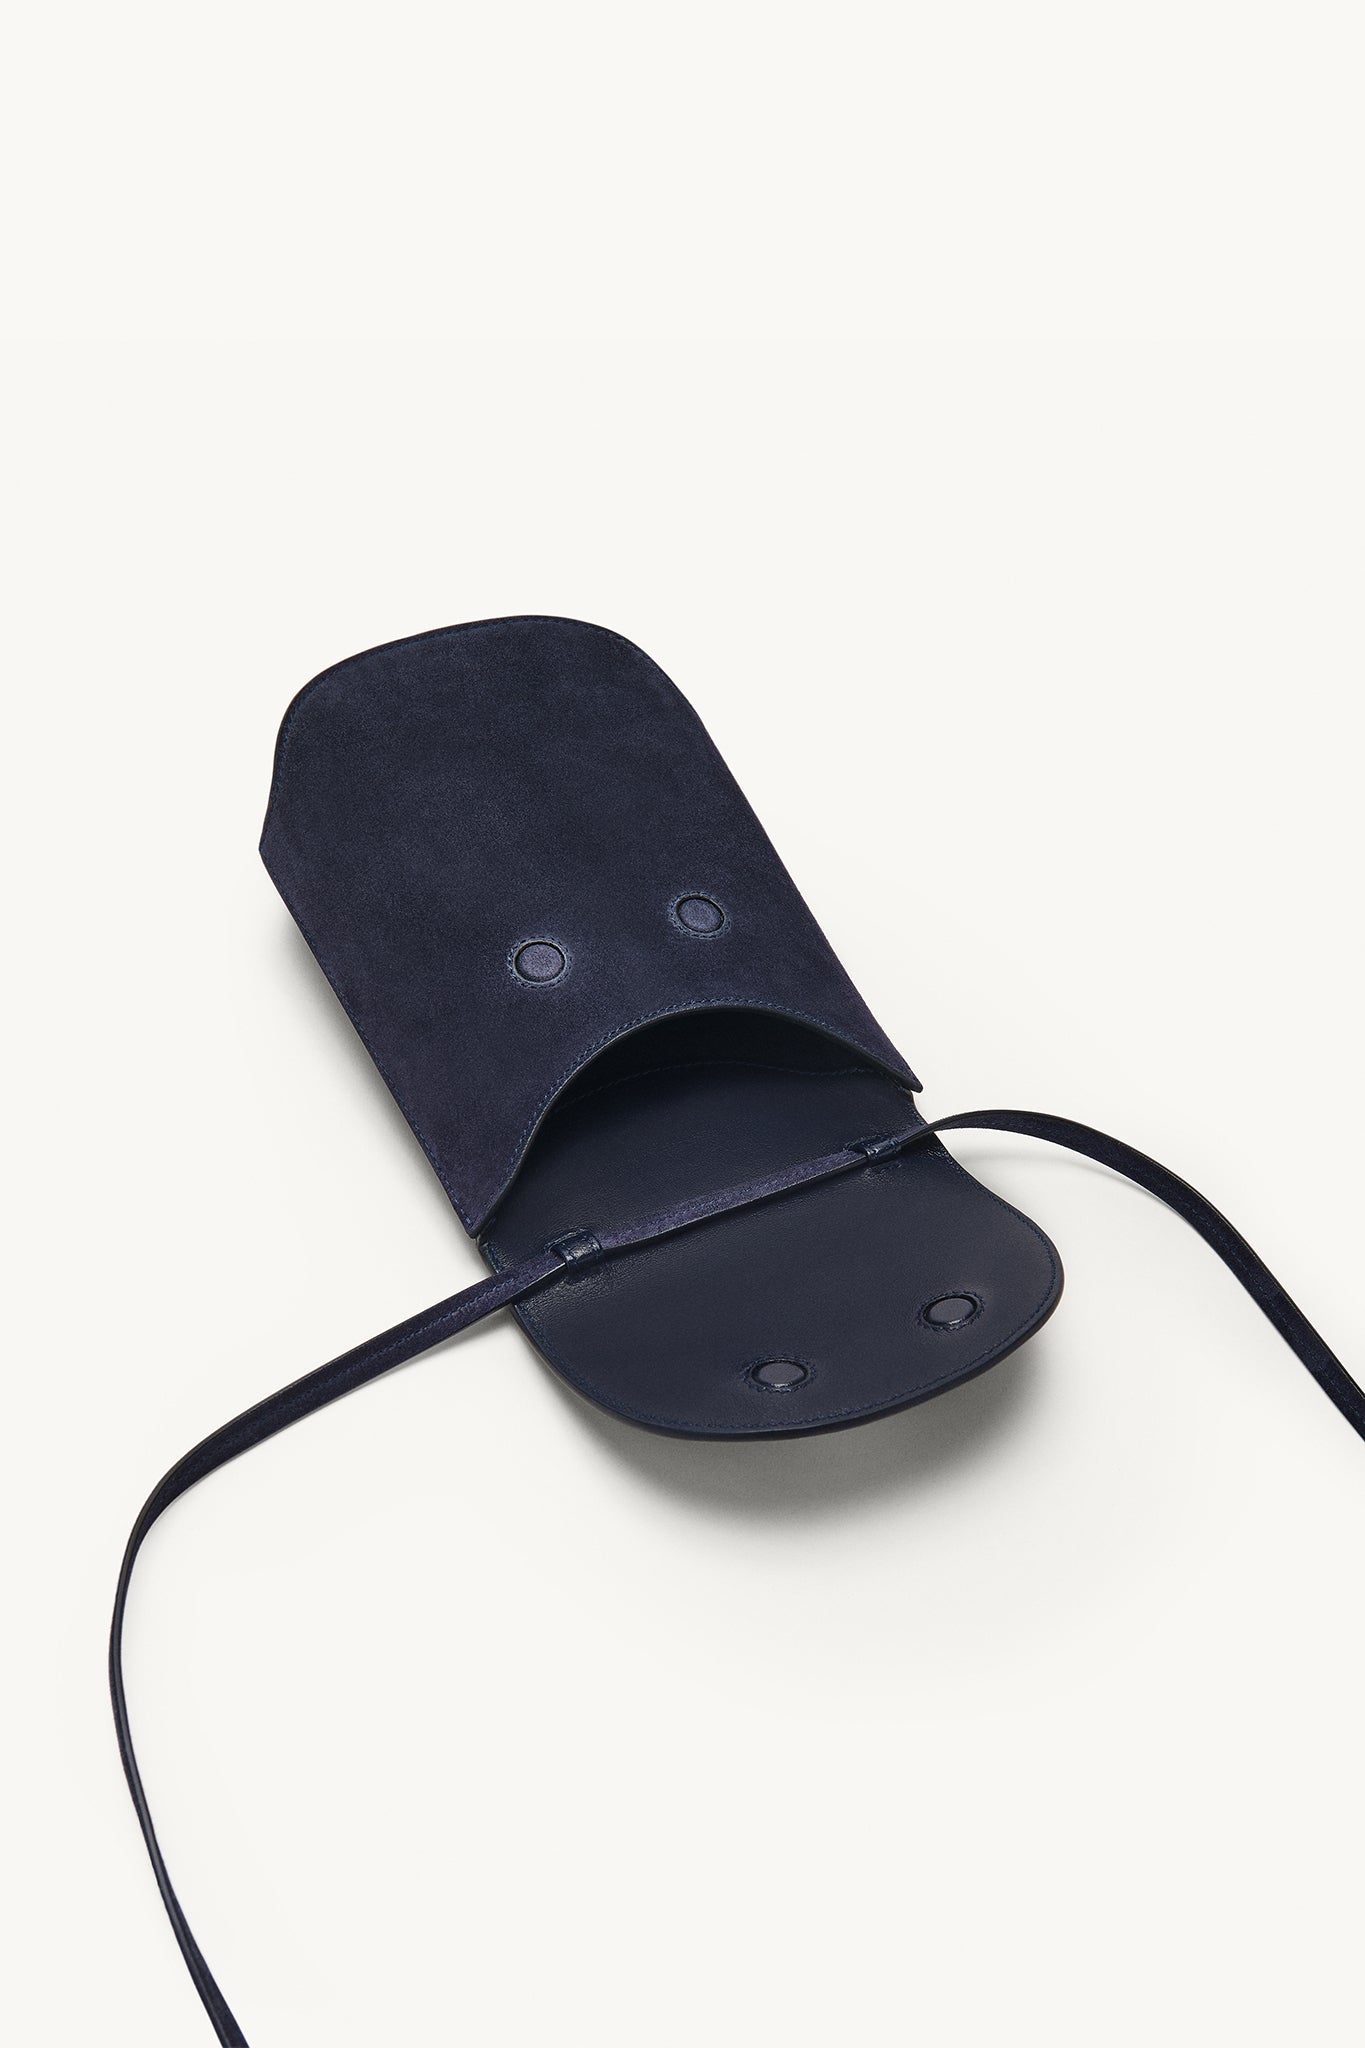 Tondo Pouch in Navy Suede